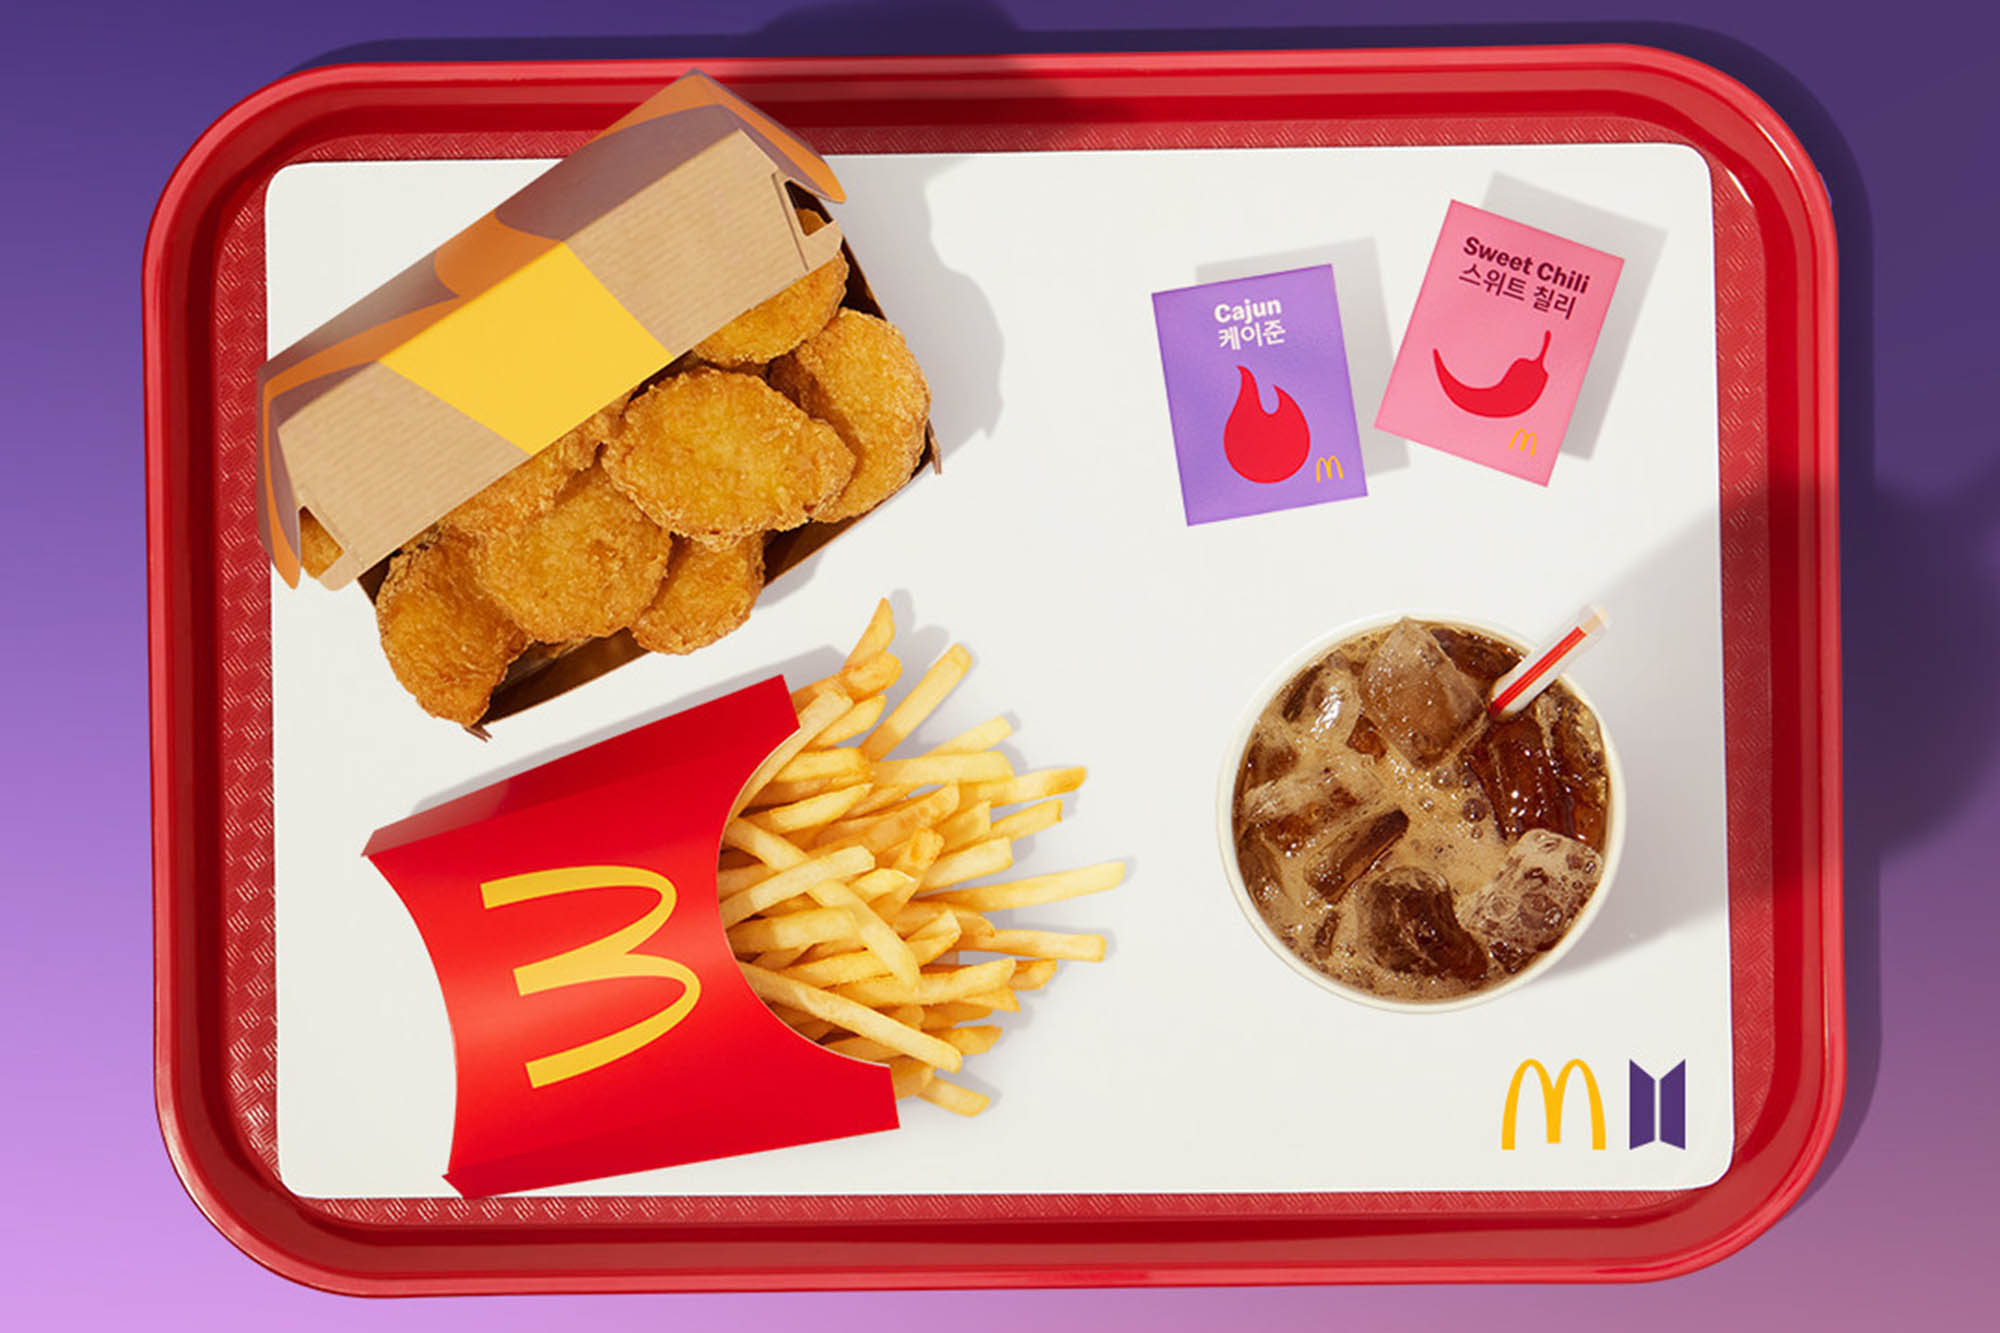 Here's what the BTS McDonald's meal comes with